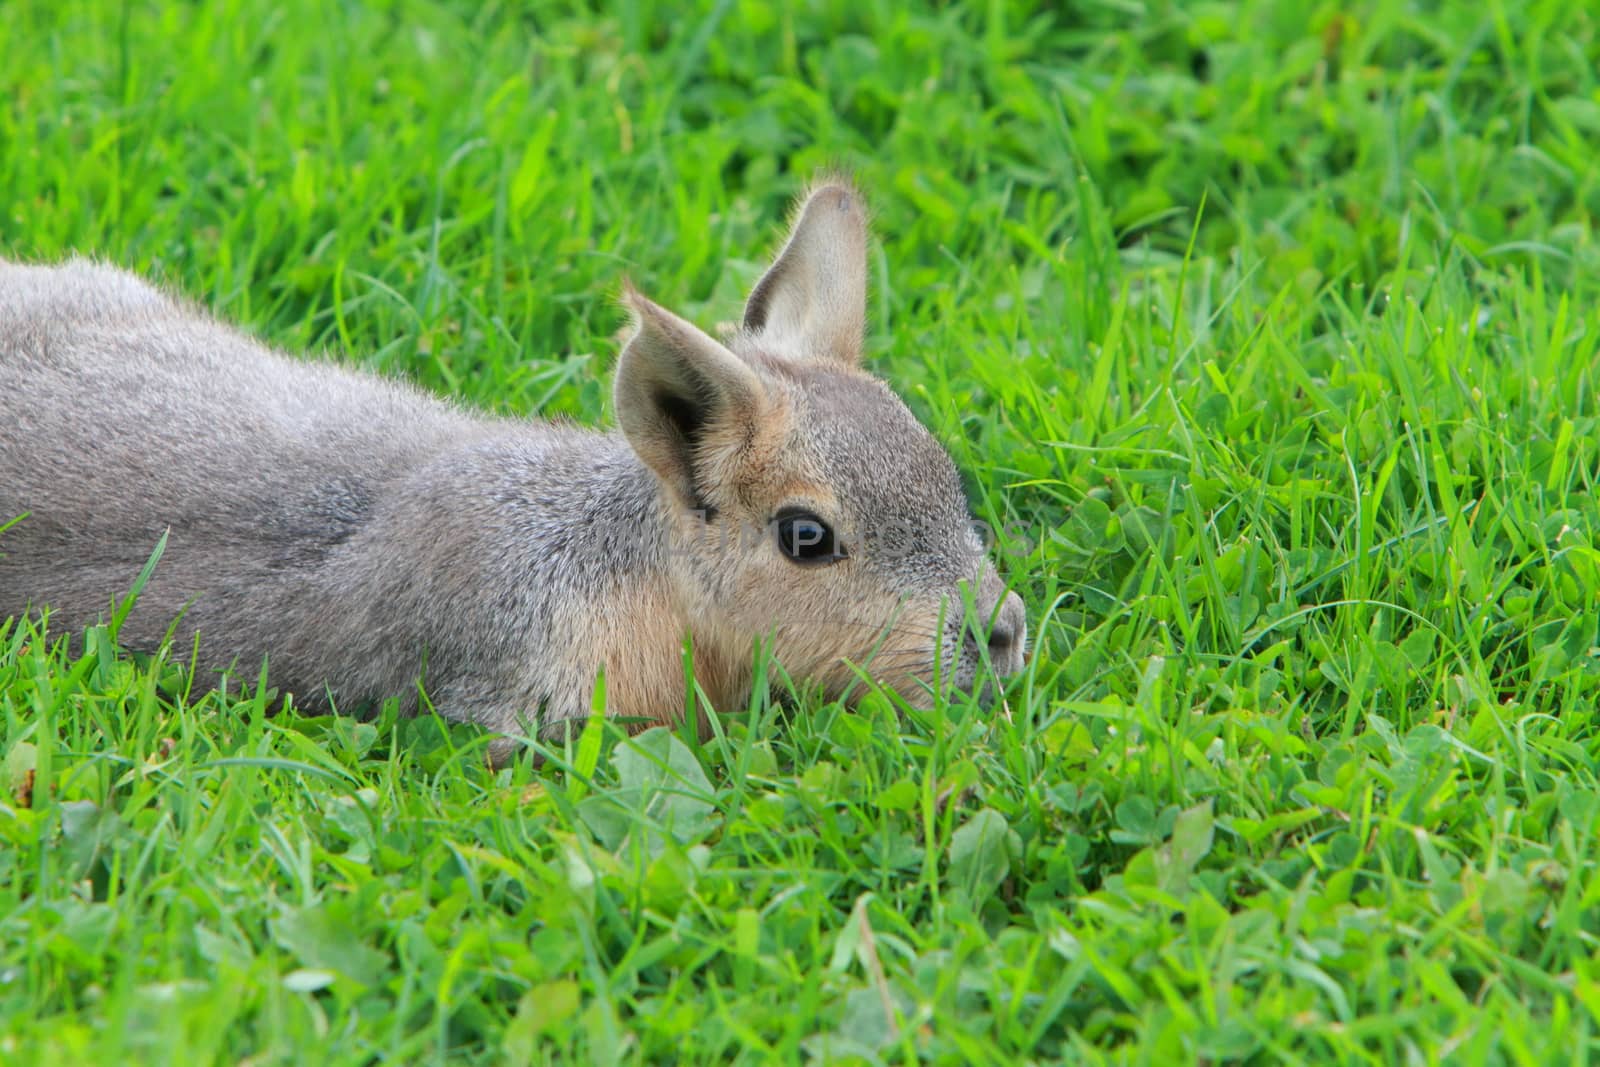 A young Patagonian mara by mitzy